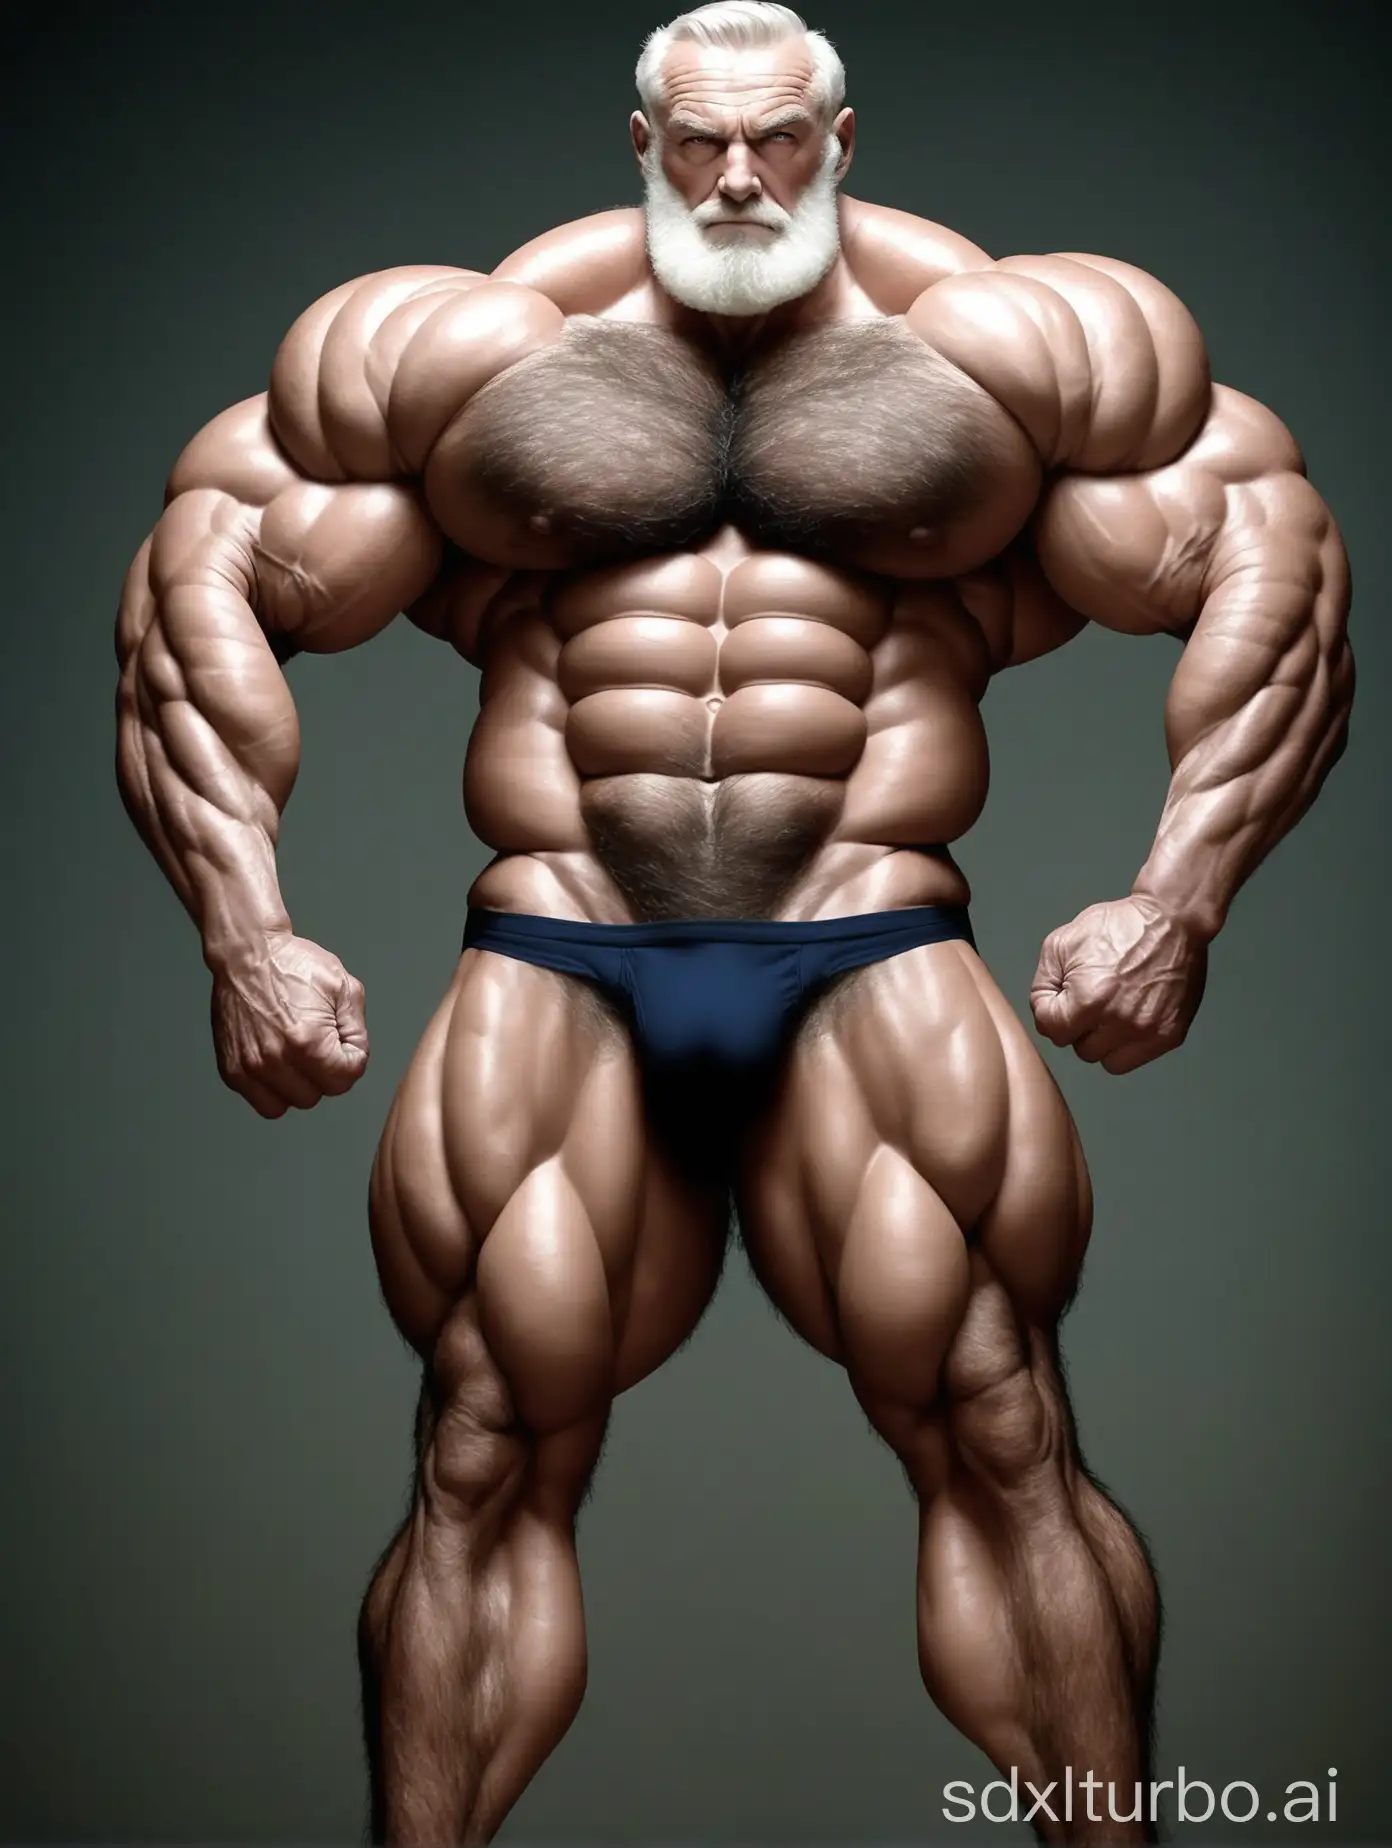 White skin and massive muscle stud, much body hair. Huge and giant and strong body. Very long and strong legs. 2m tall. Very big chest. Very big biceps. 8-pack abs. Very massive muscle body. Wearing underwear. He is extremely tall and muscular. Very old man. Very handsome men.